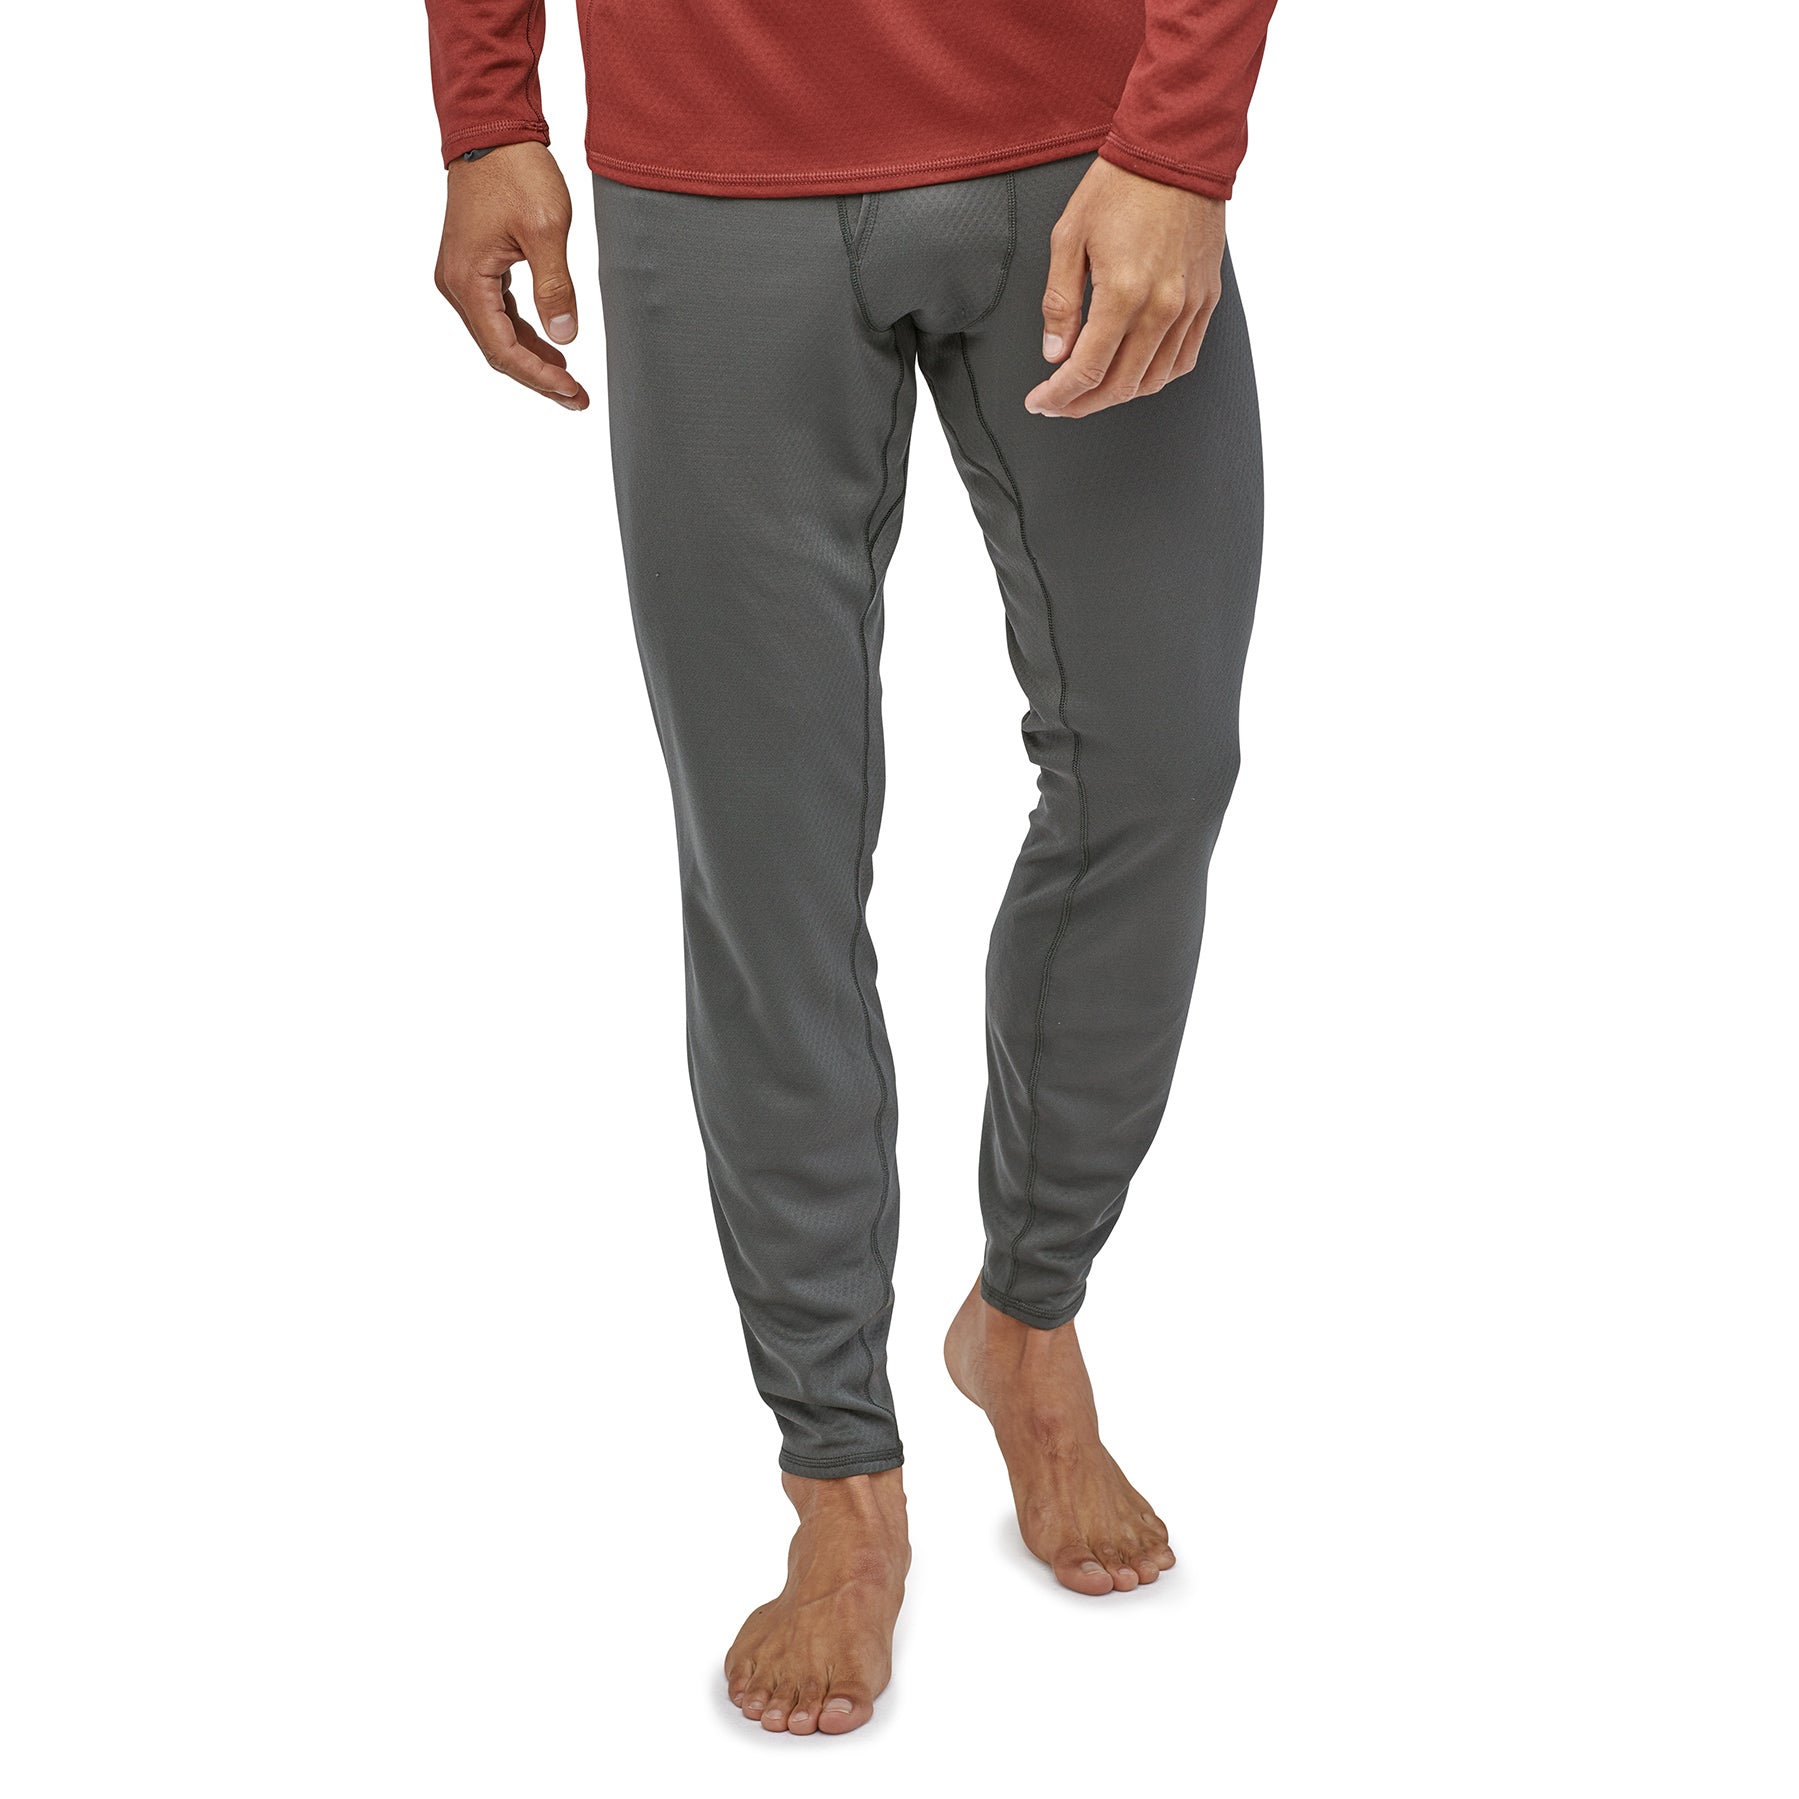 patagonia men's capilene midweight bottoms in forge grey on model